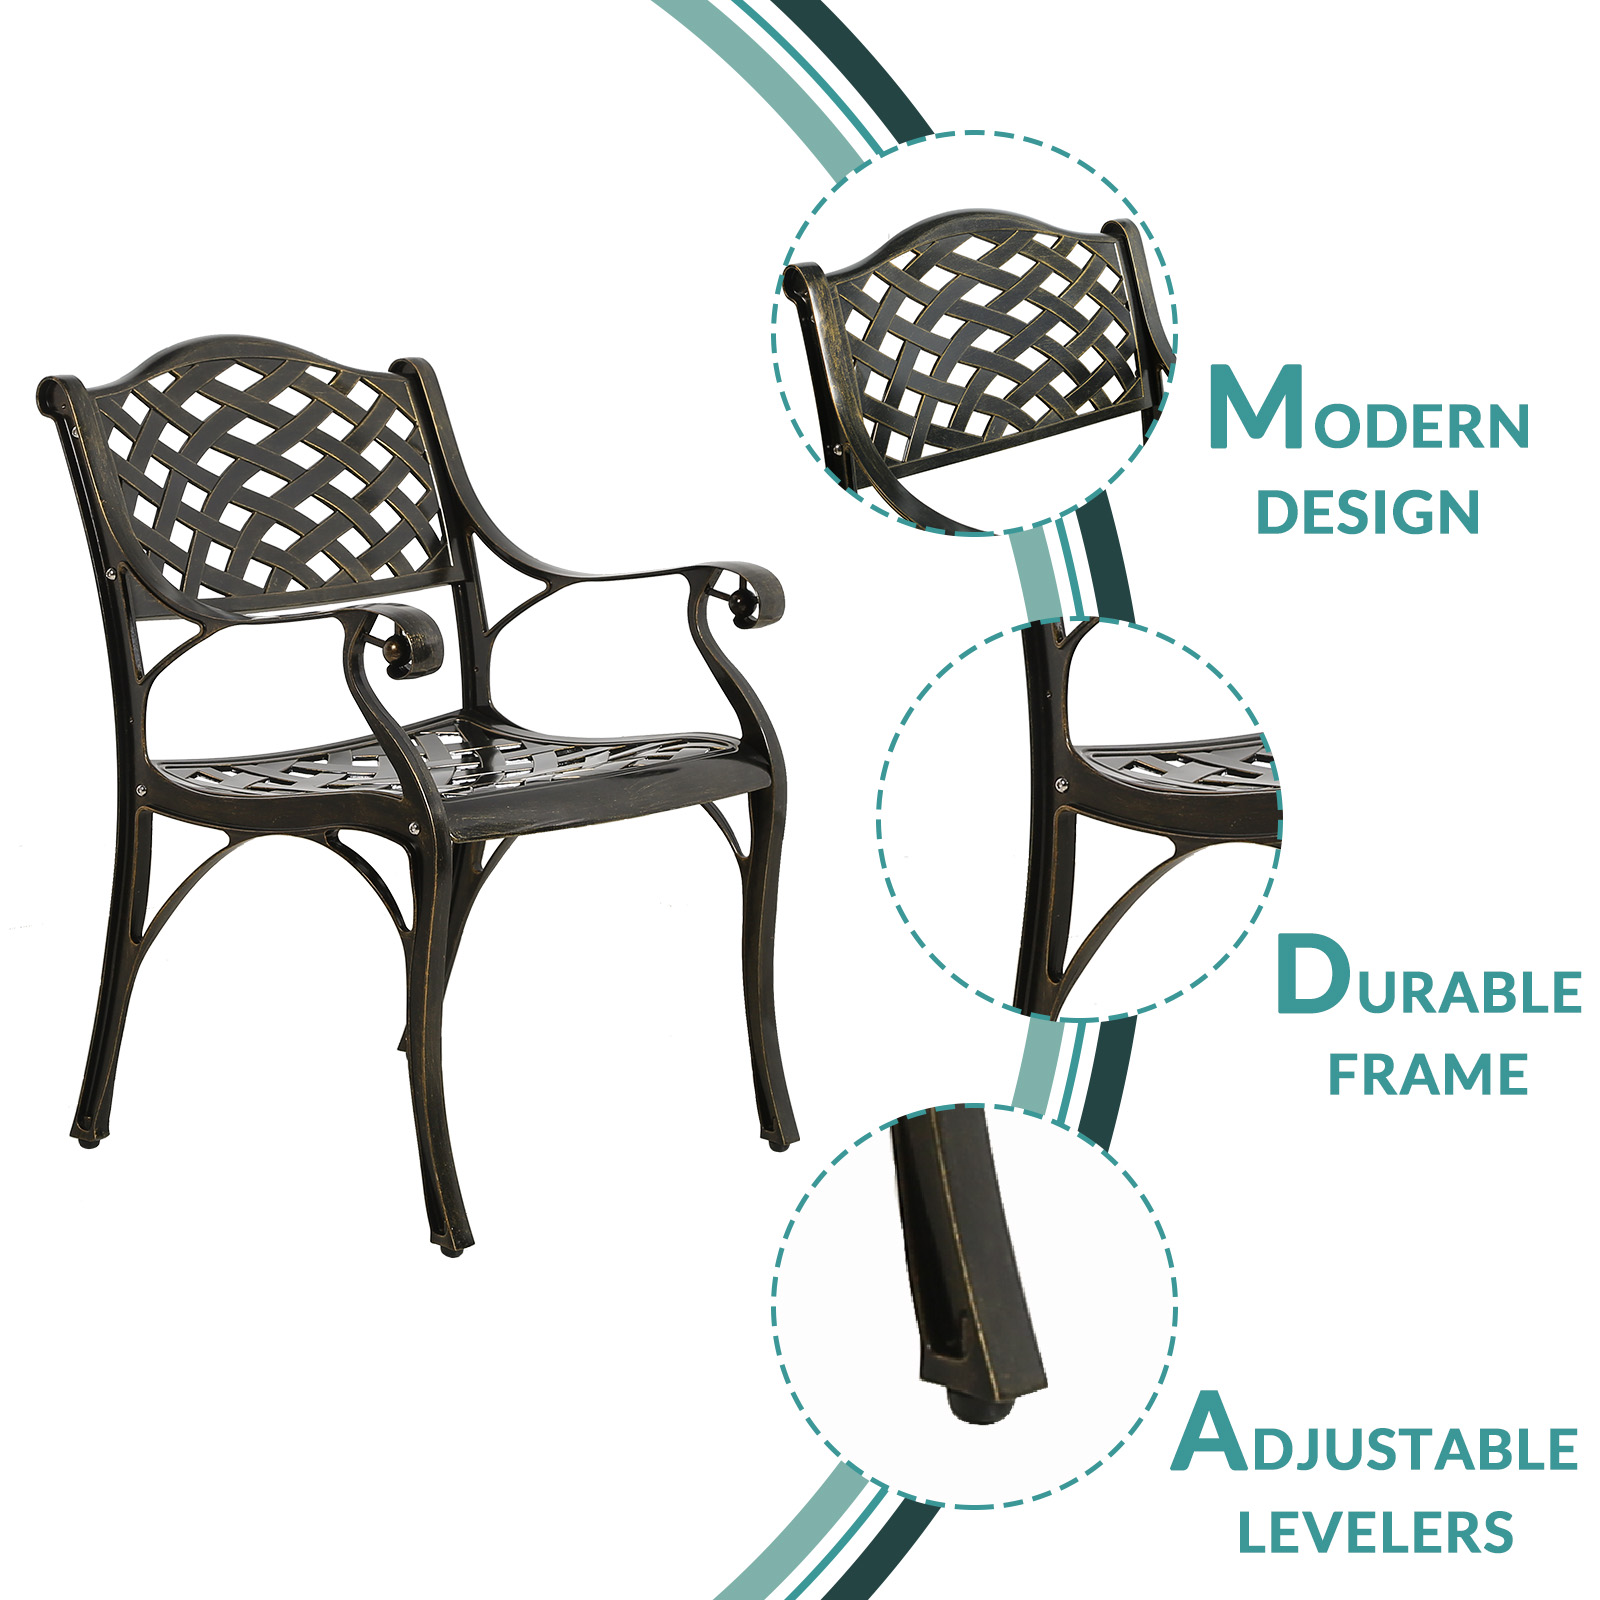 MEETWARM 2 Piece Patio Dining Chairs, Outdoor All-Weather Cast Aluminum Chairs, Patio Bistro Dining Chair Set of 2 for Garden Deck Backyard, Lattice Weave Design - image 2 of 7